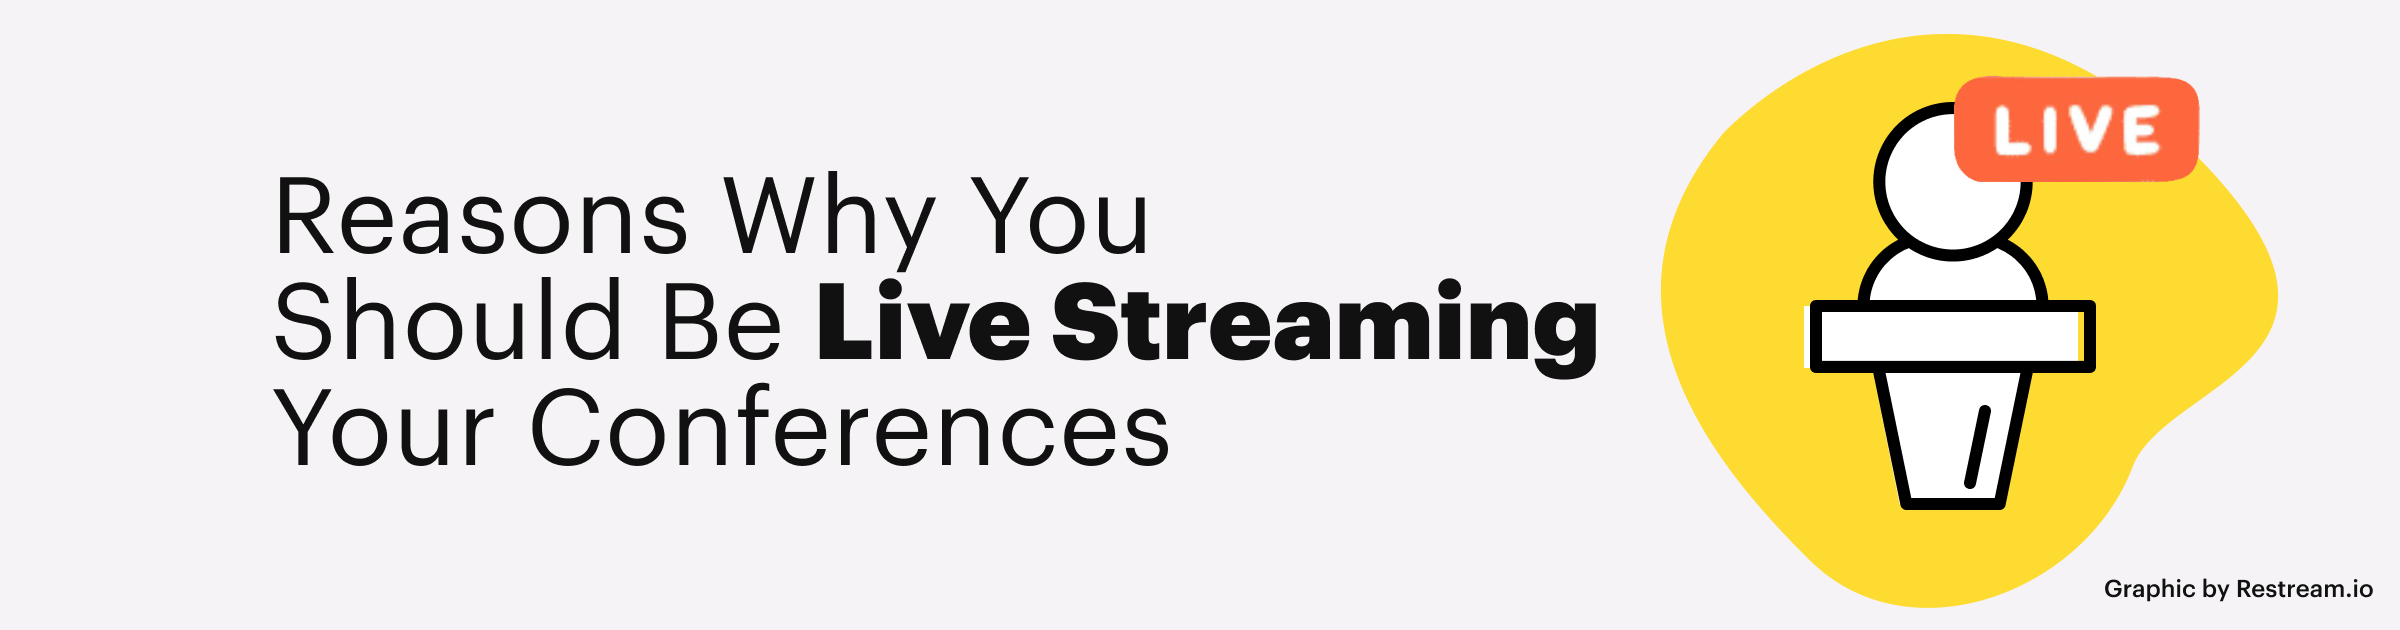 Reasons why you should be live streaming your conferences